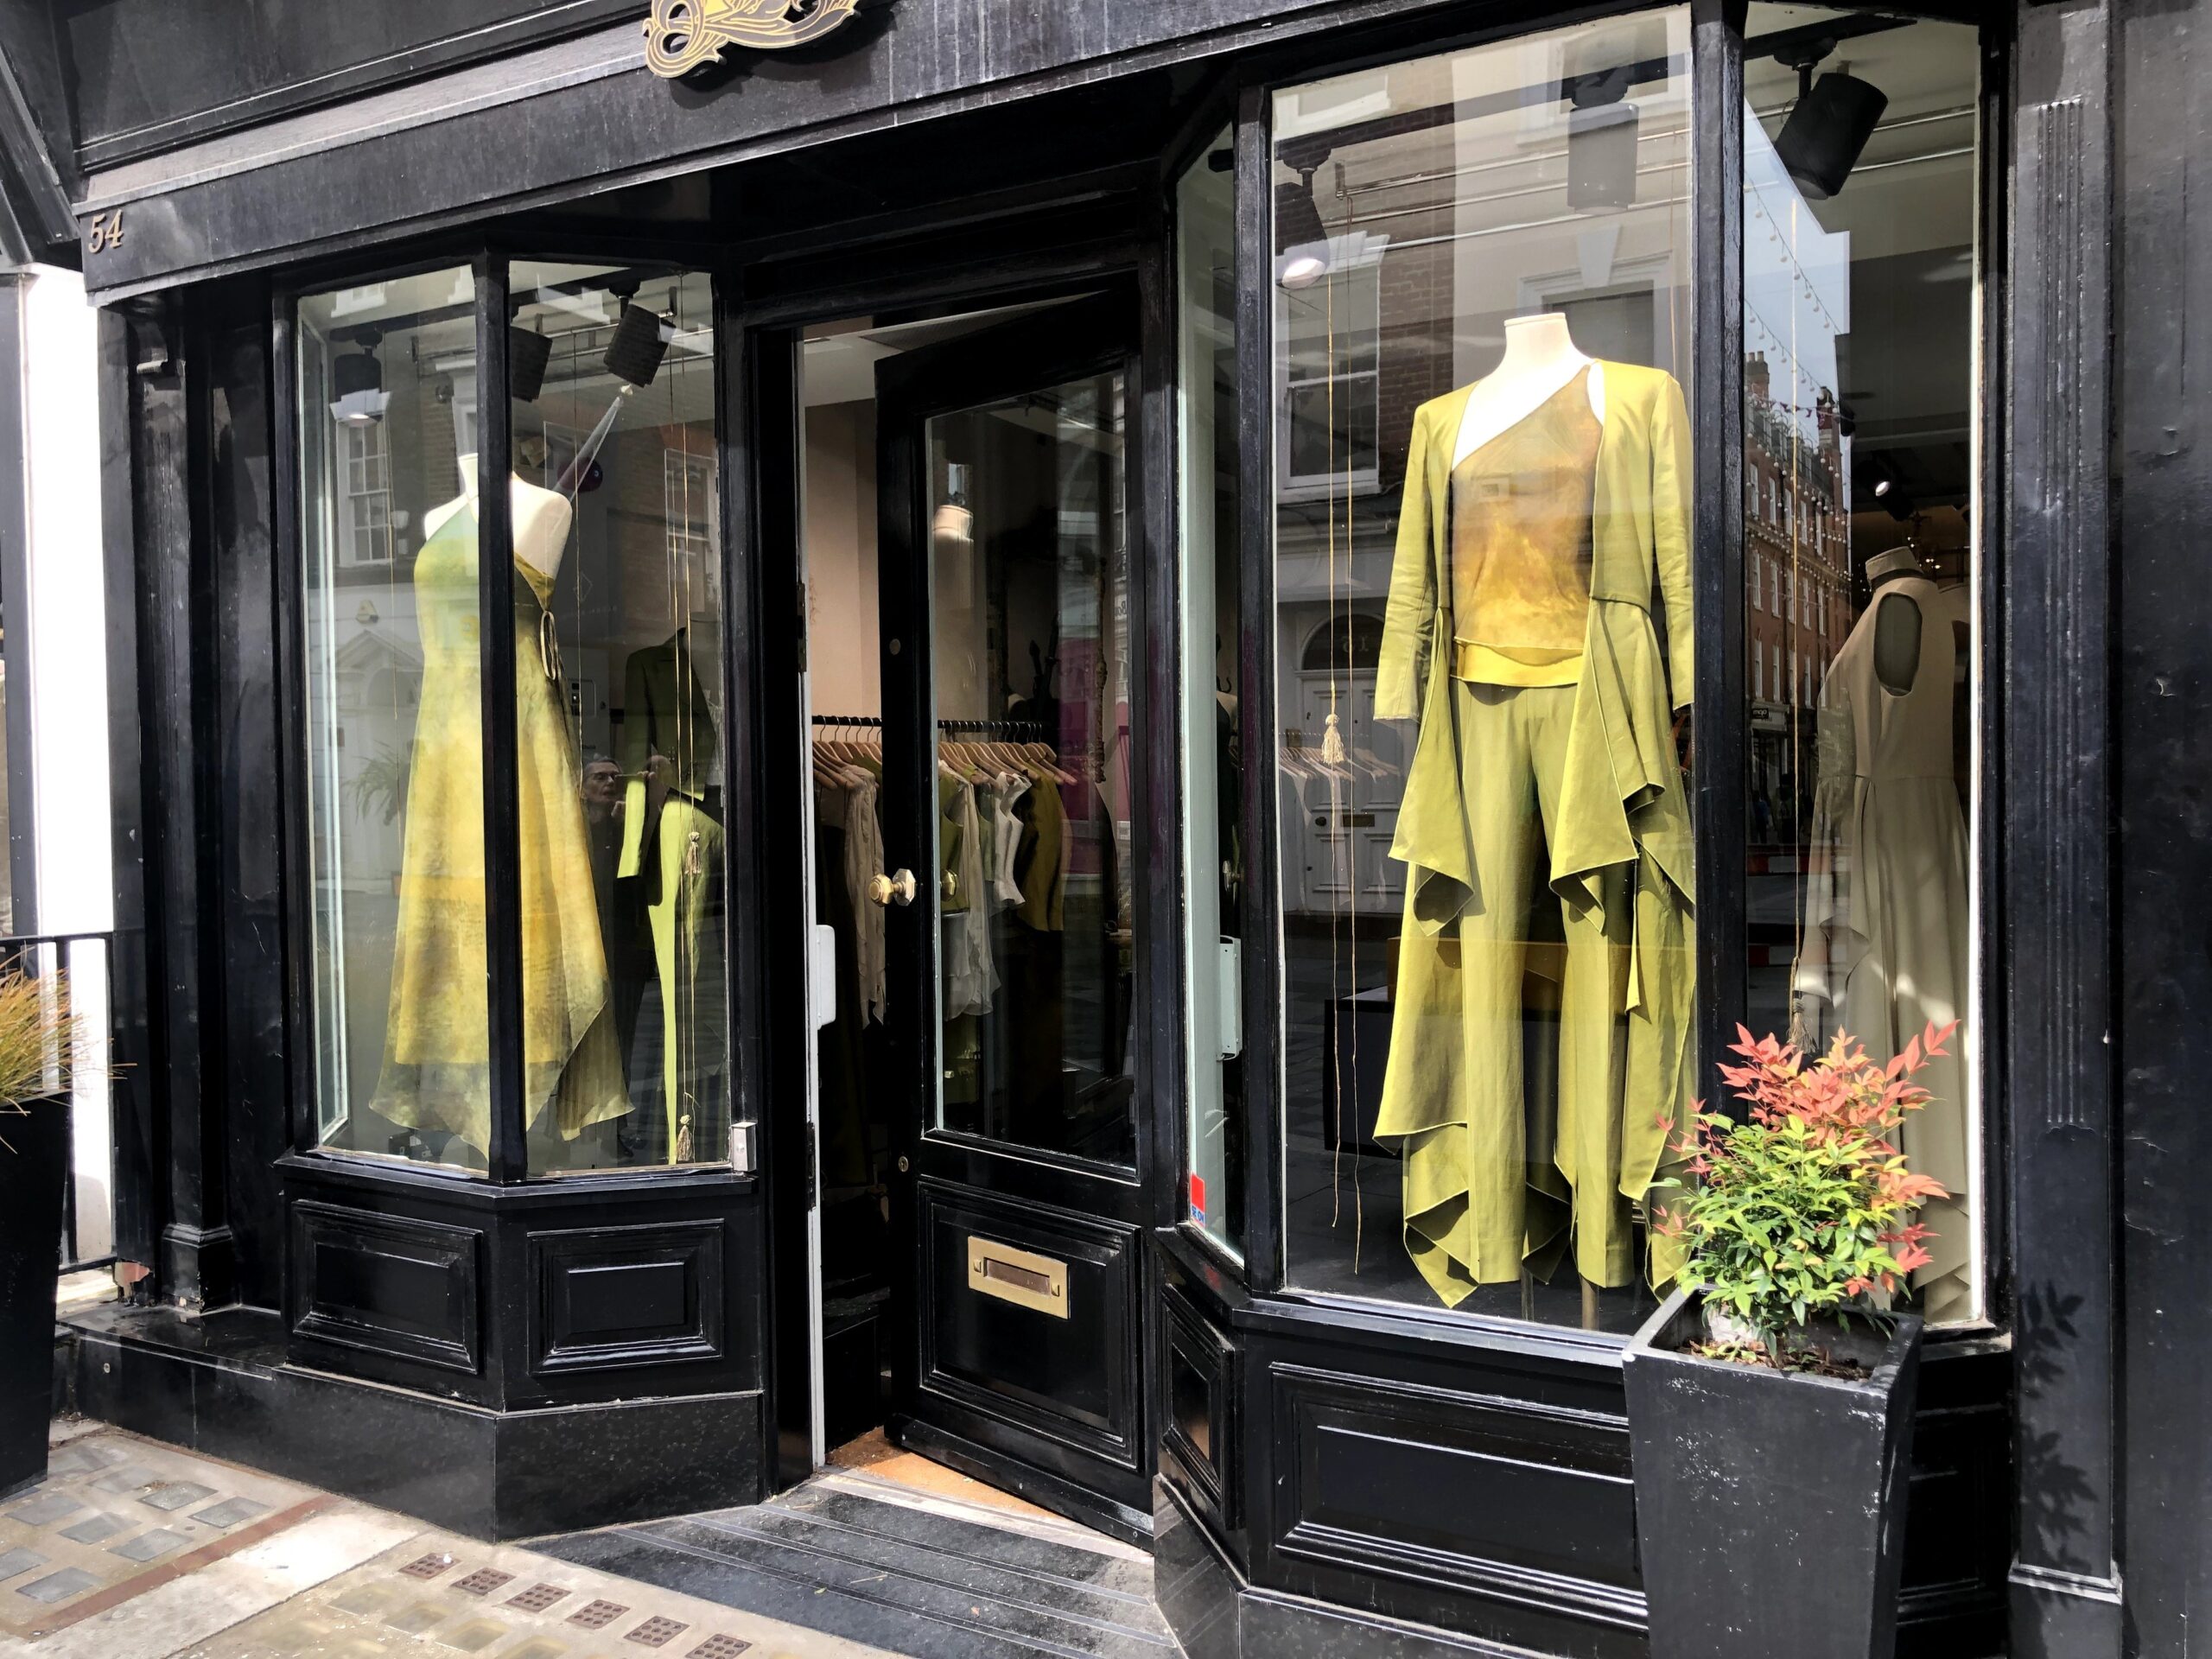 A shop window in London, with a chartreuse outfit in the window - a combination of Pantone's Spring/Summer 2023 fashion colors Blazing Yellow and Titanite.